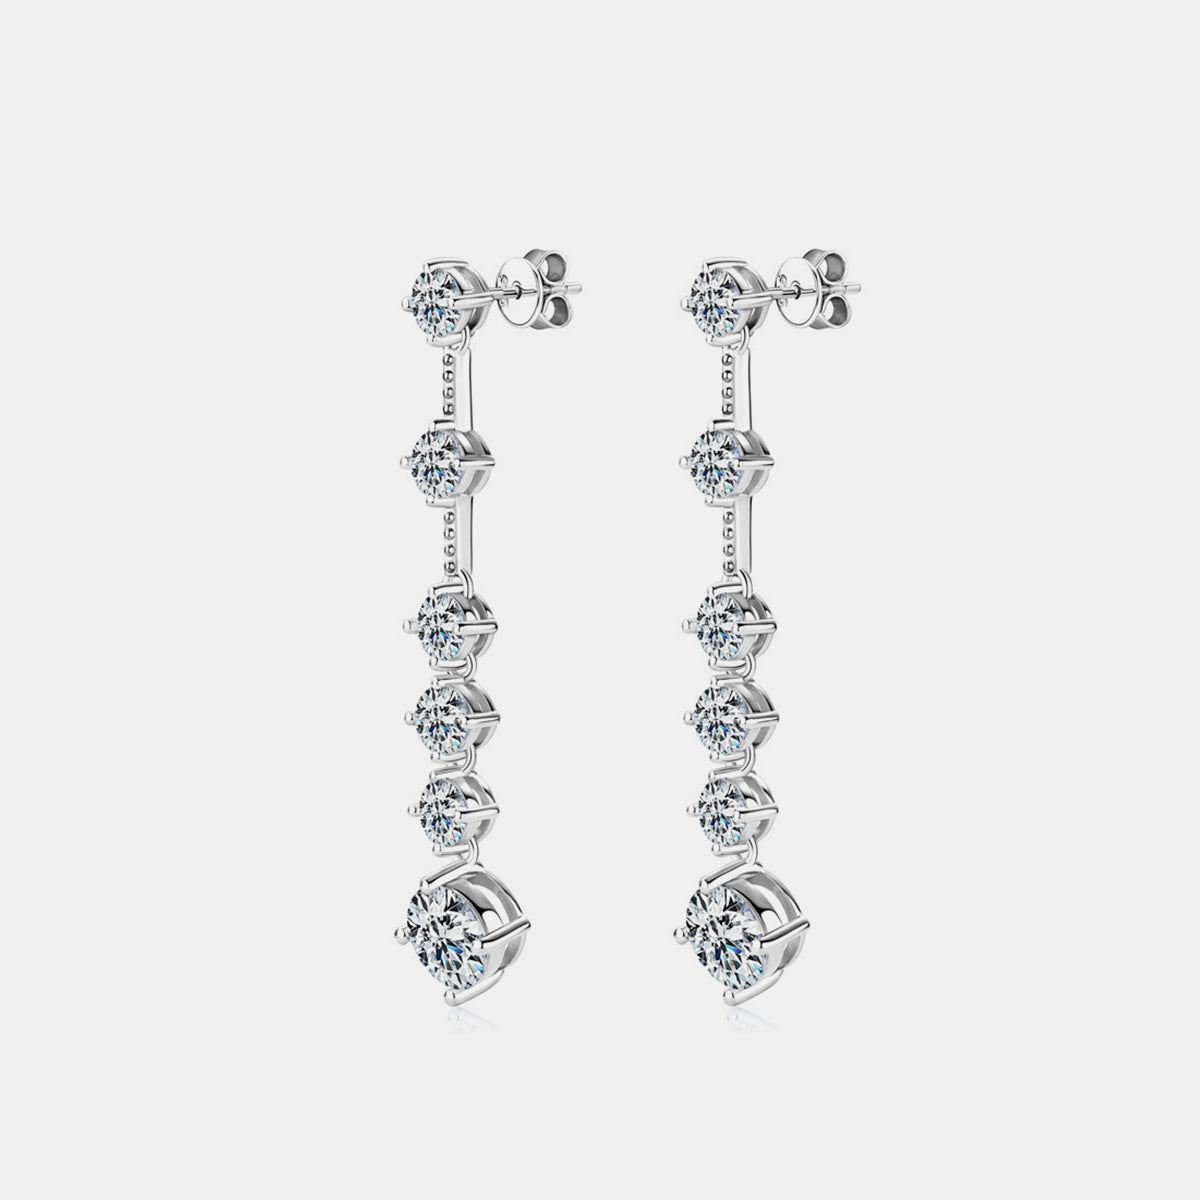 Person wearing sterling silver linear drop earrings, adding a touch of understated elegance.